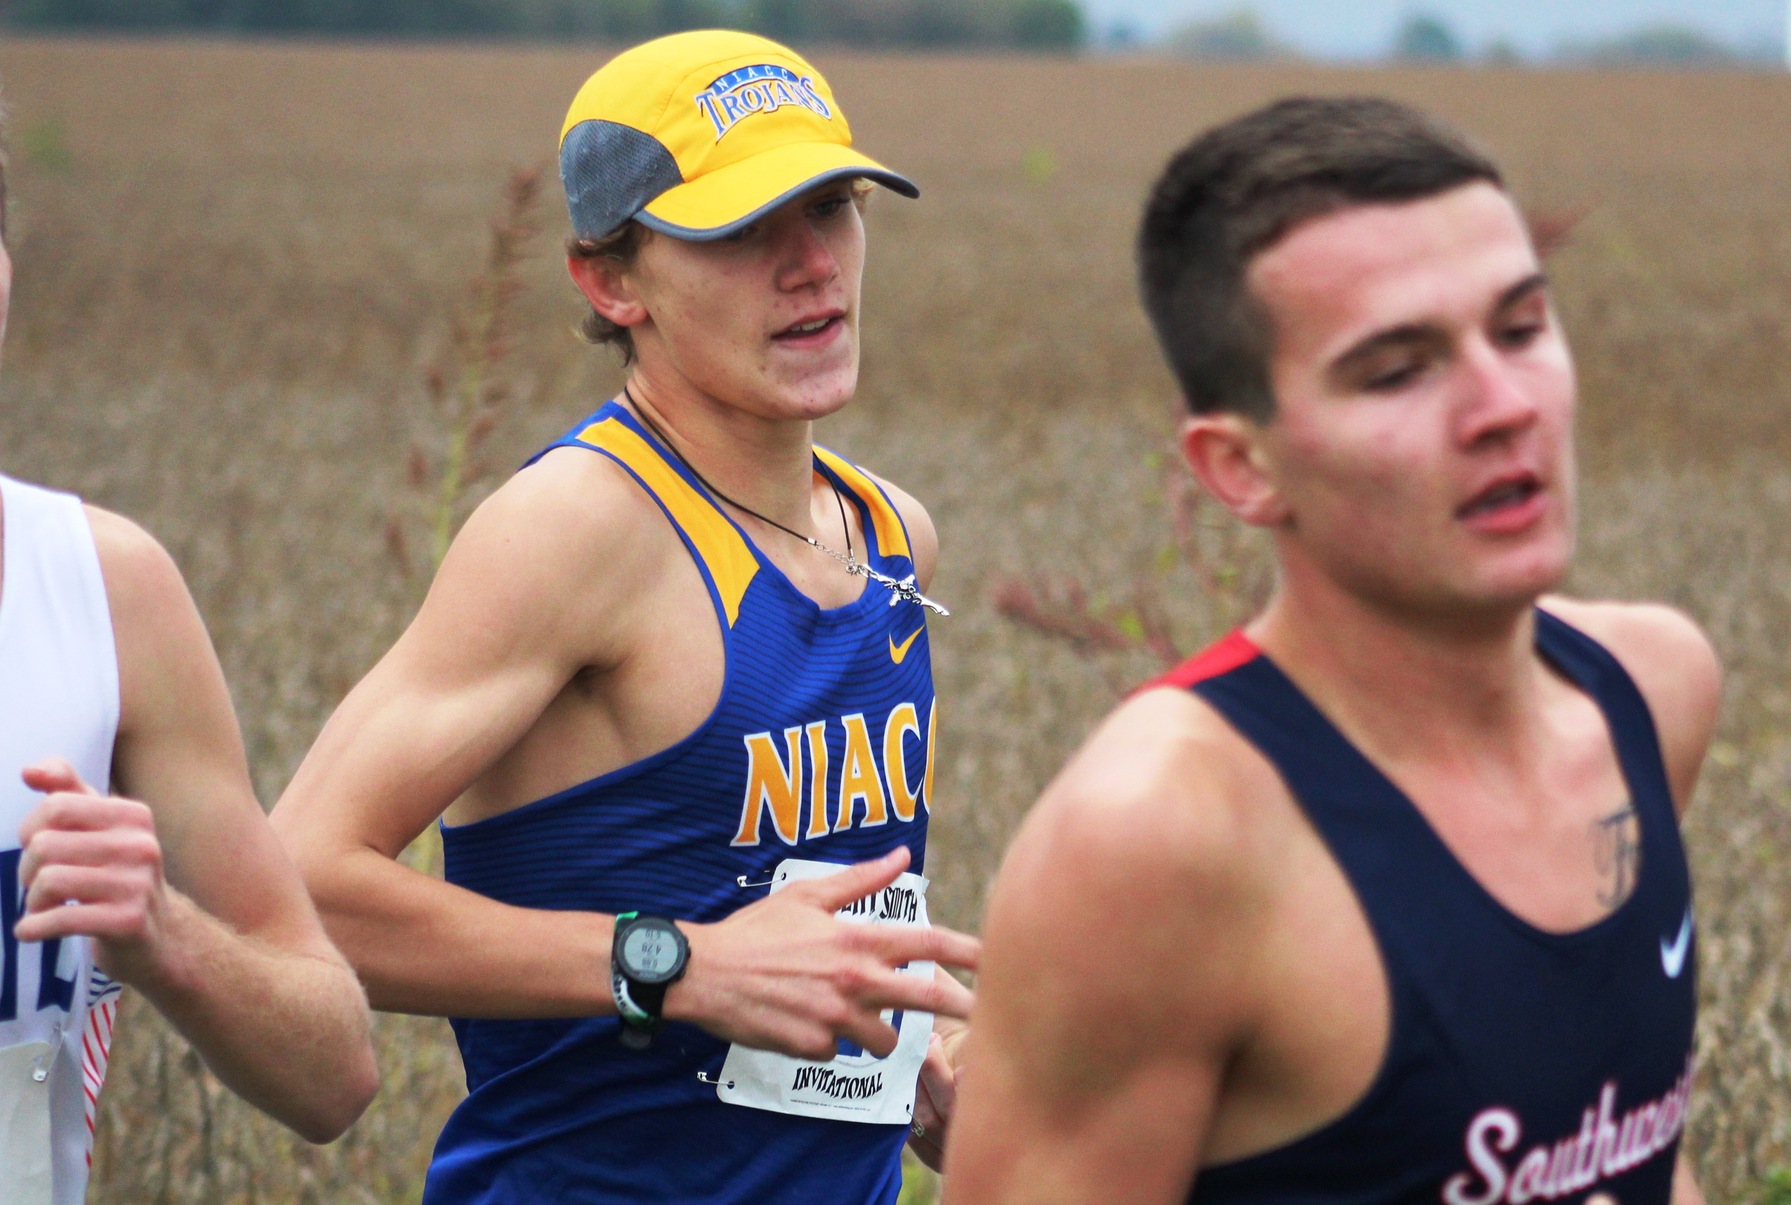 NIACC sophomore John Kraft runs at the Trent Smith Invitational on Oct. 13. Kraft was an honorable mention all-region runner in 2016.